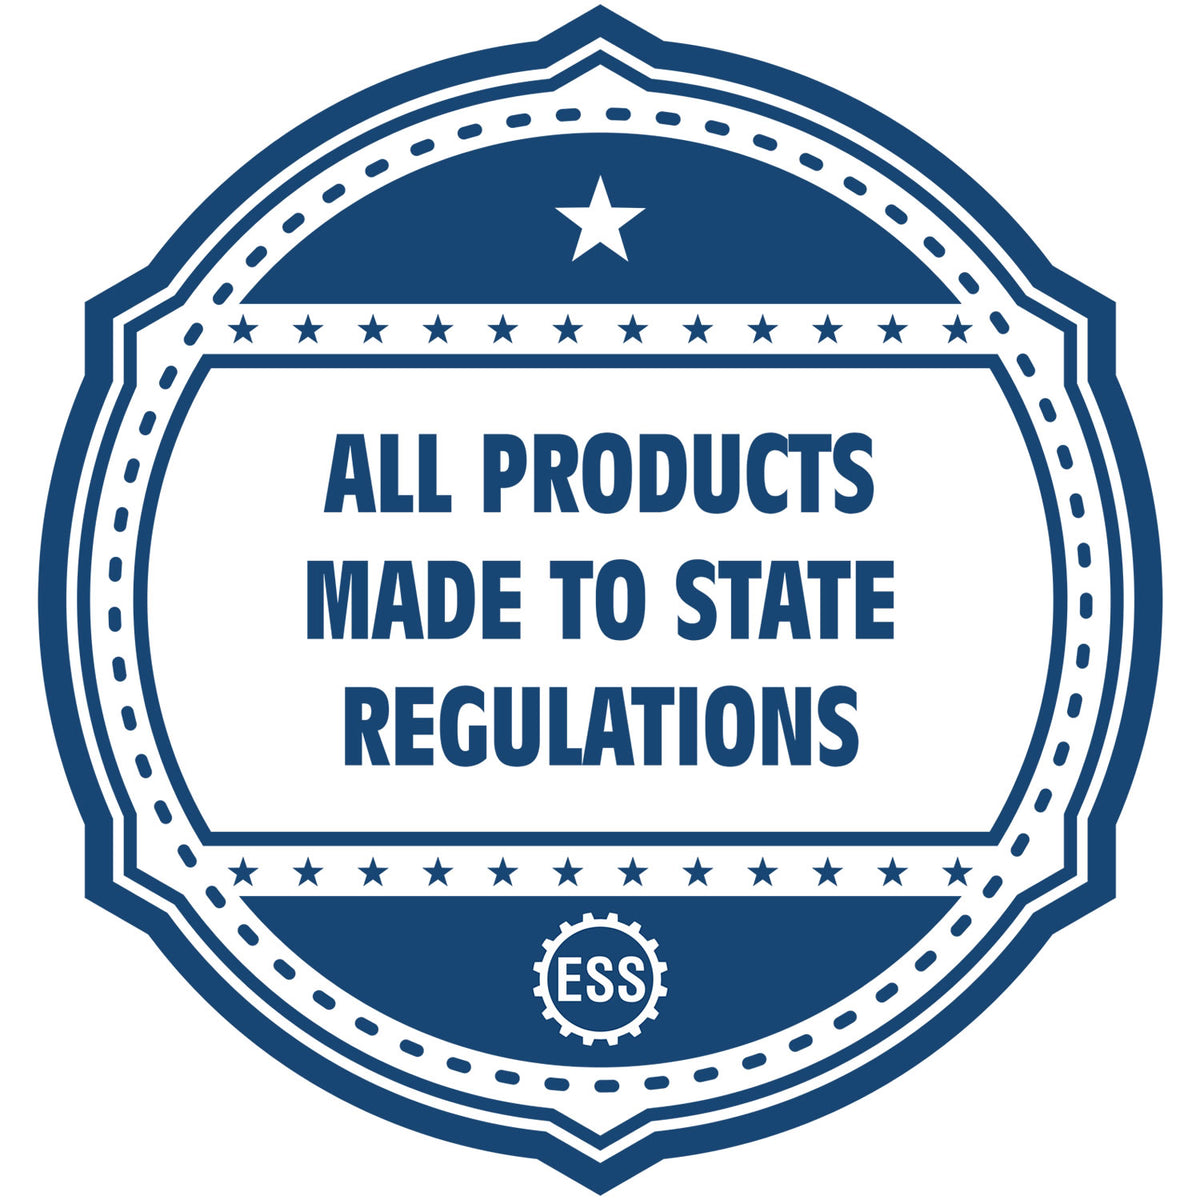 A blue icon or badge for the Hybrid Delaware Engineer Seal showing that this product is made in compliance with state regulations.